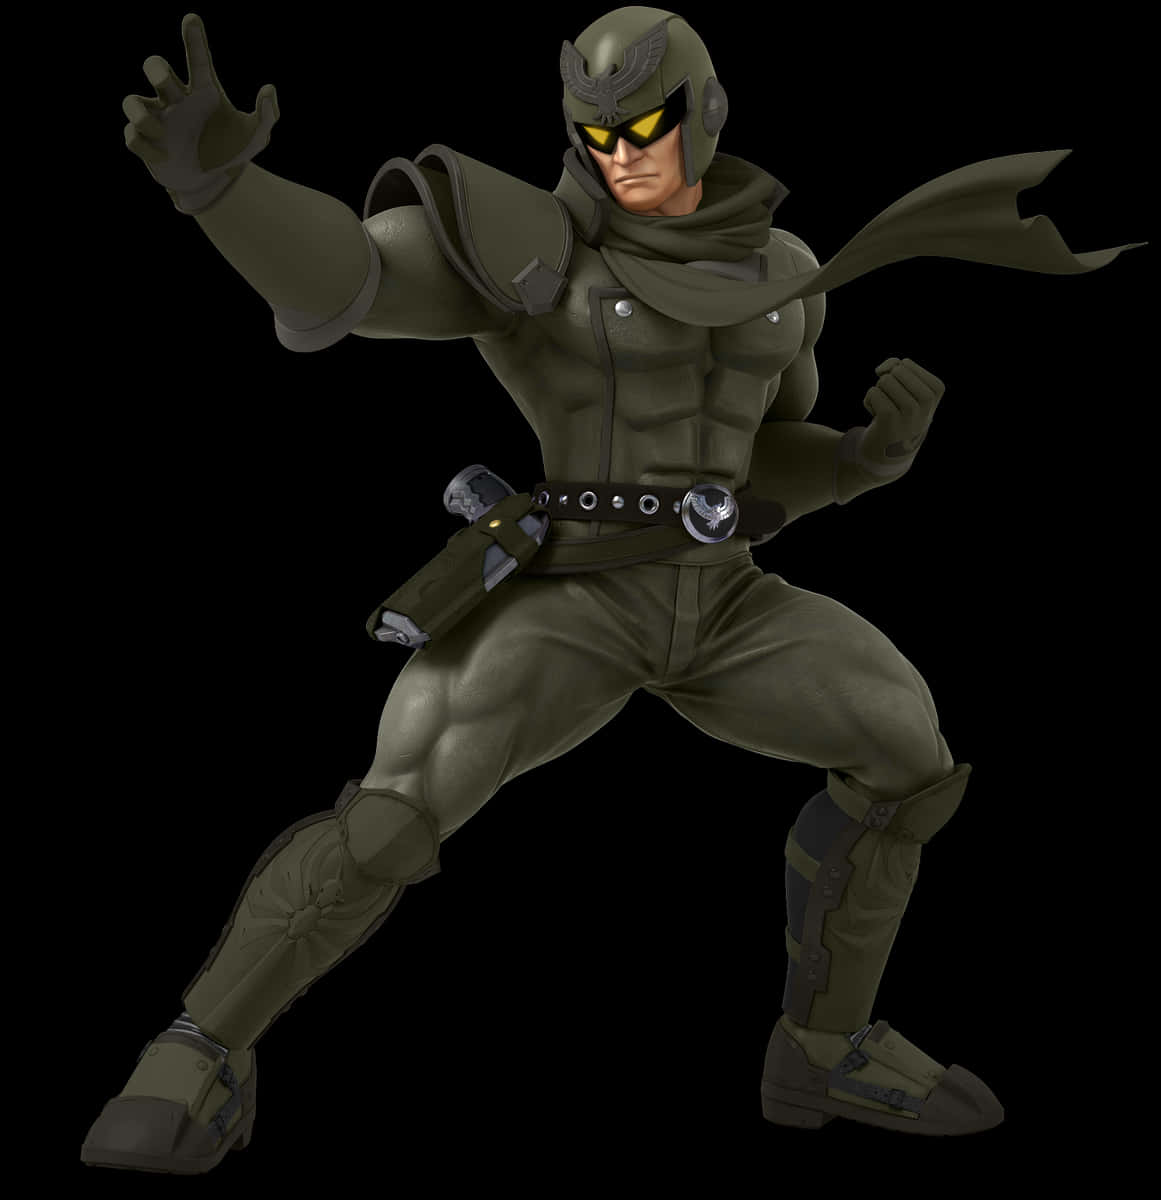 Animated Characterin Action Pose PNG